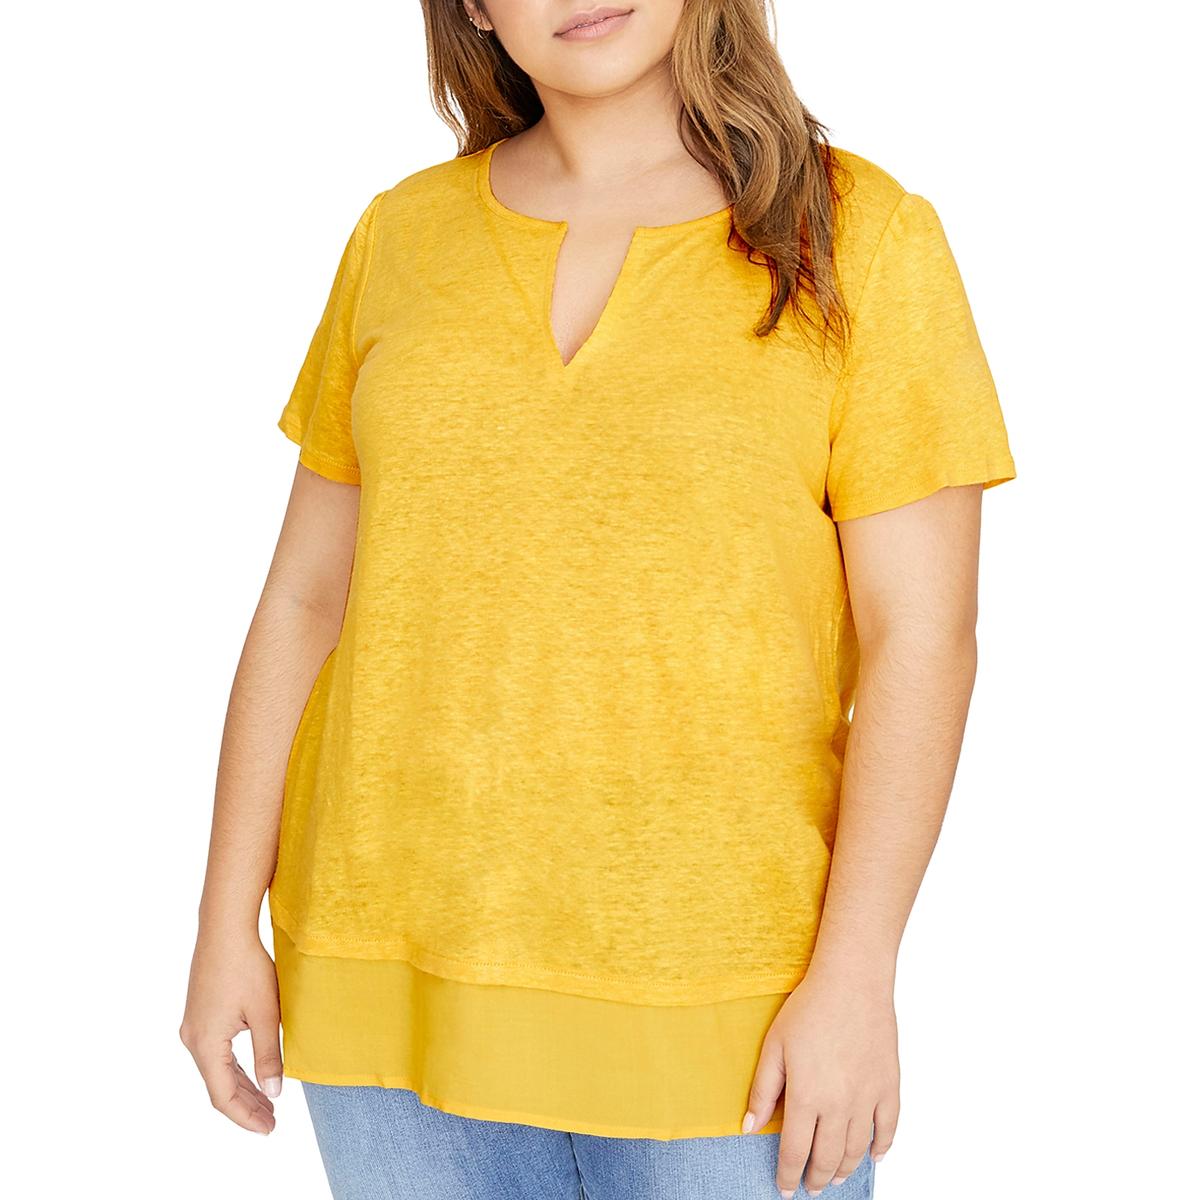 Sanctuary Womens Uptown Yellow Linen Tee Pullover Top Shirt Plus 3X ...